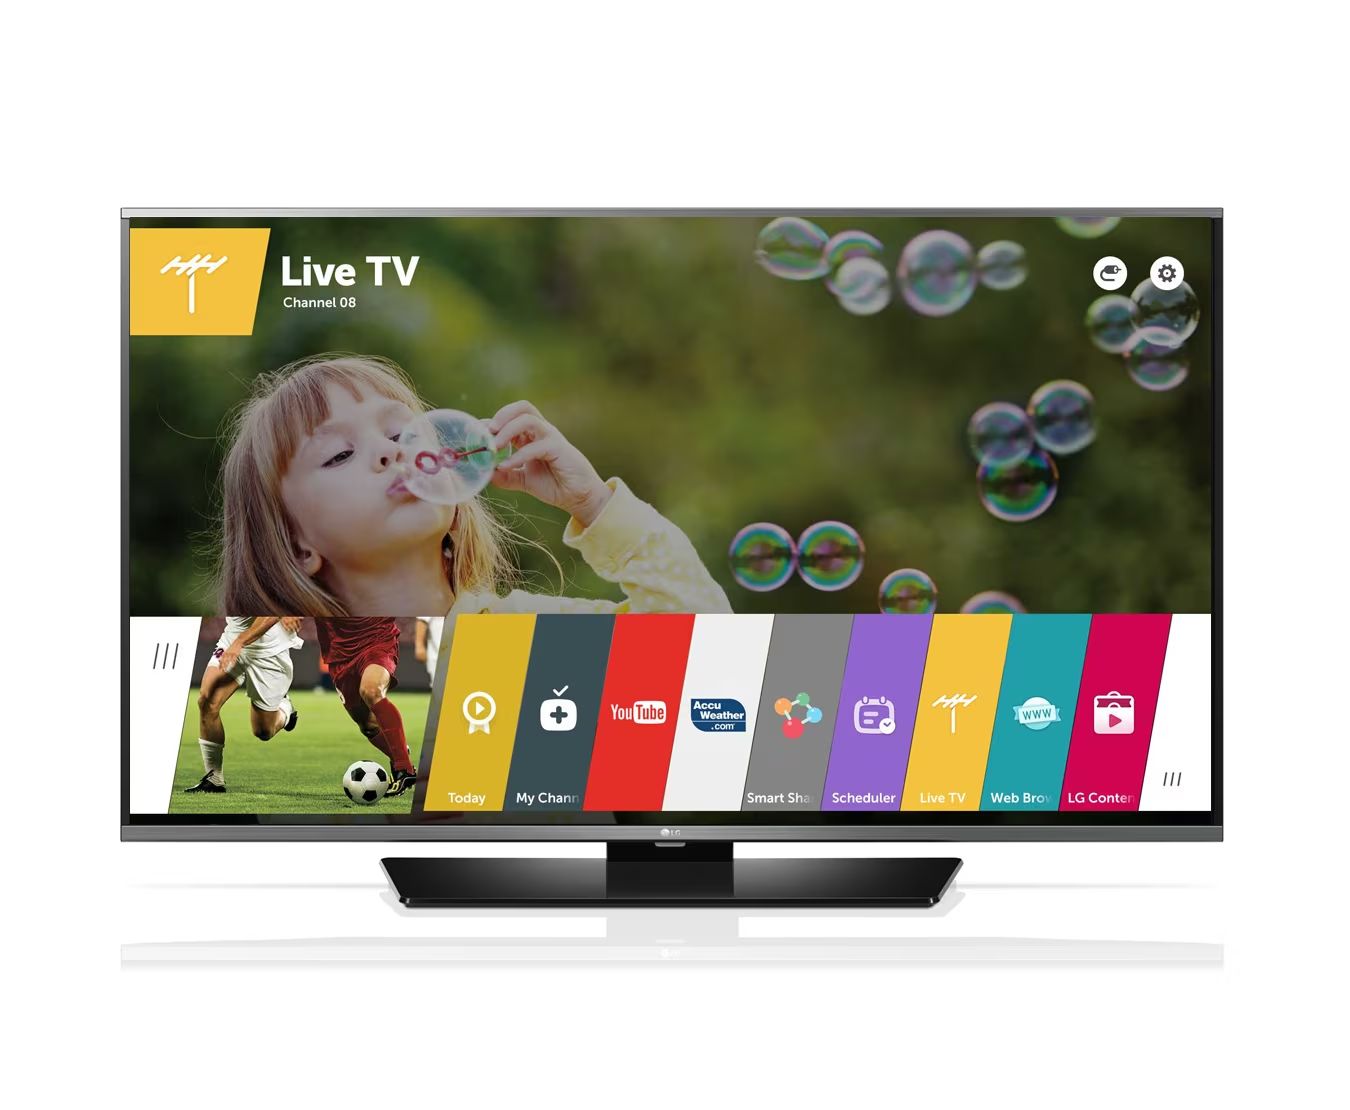 How To Get Live TV On LG Smart TV